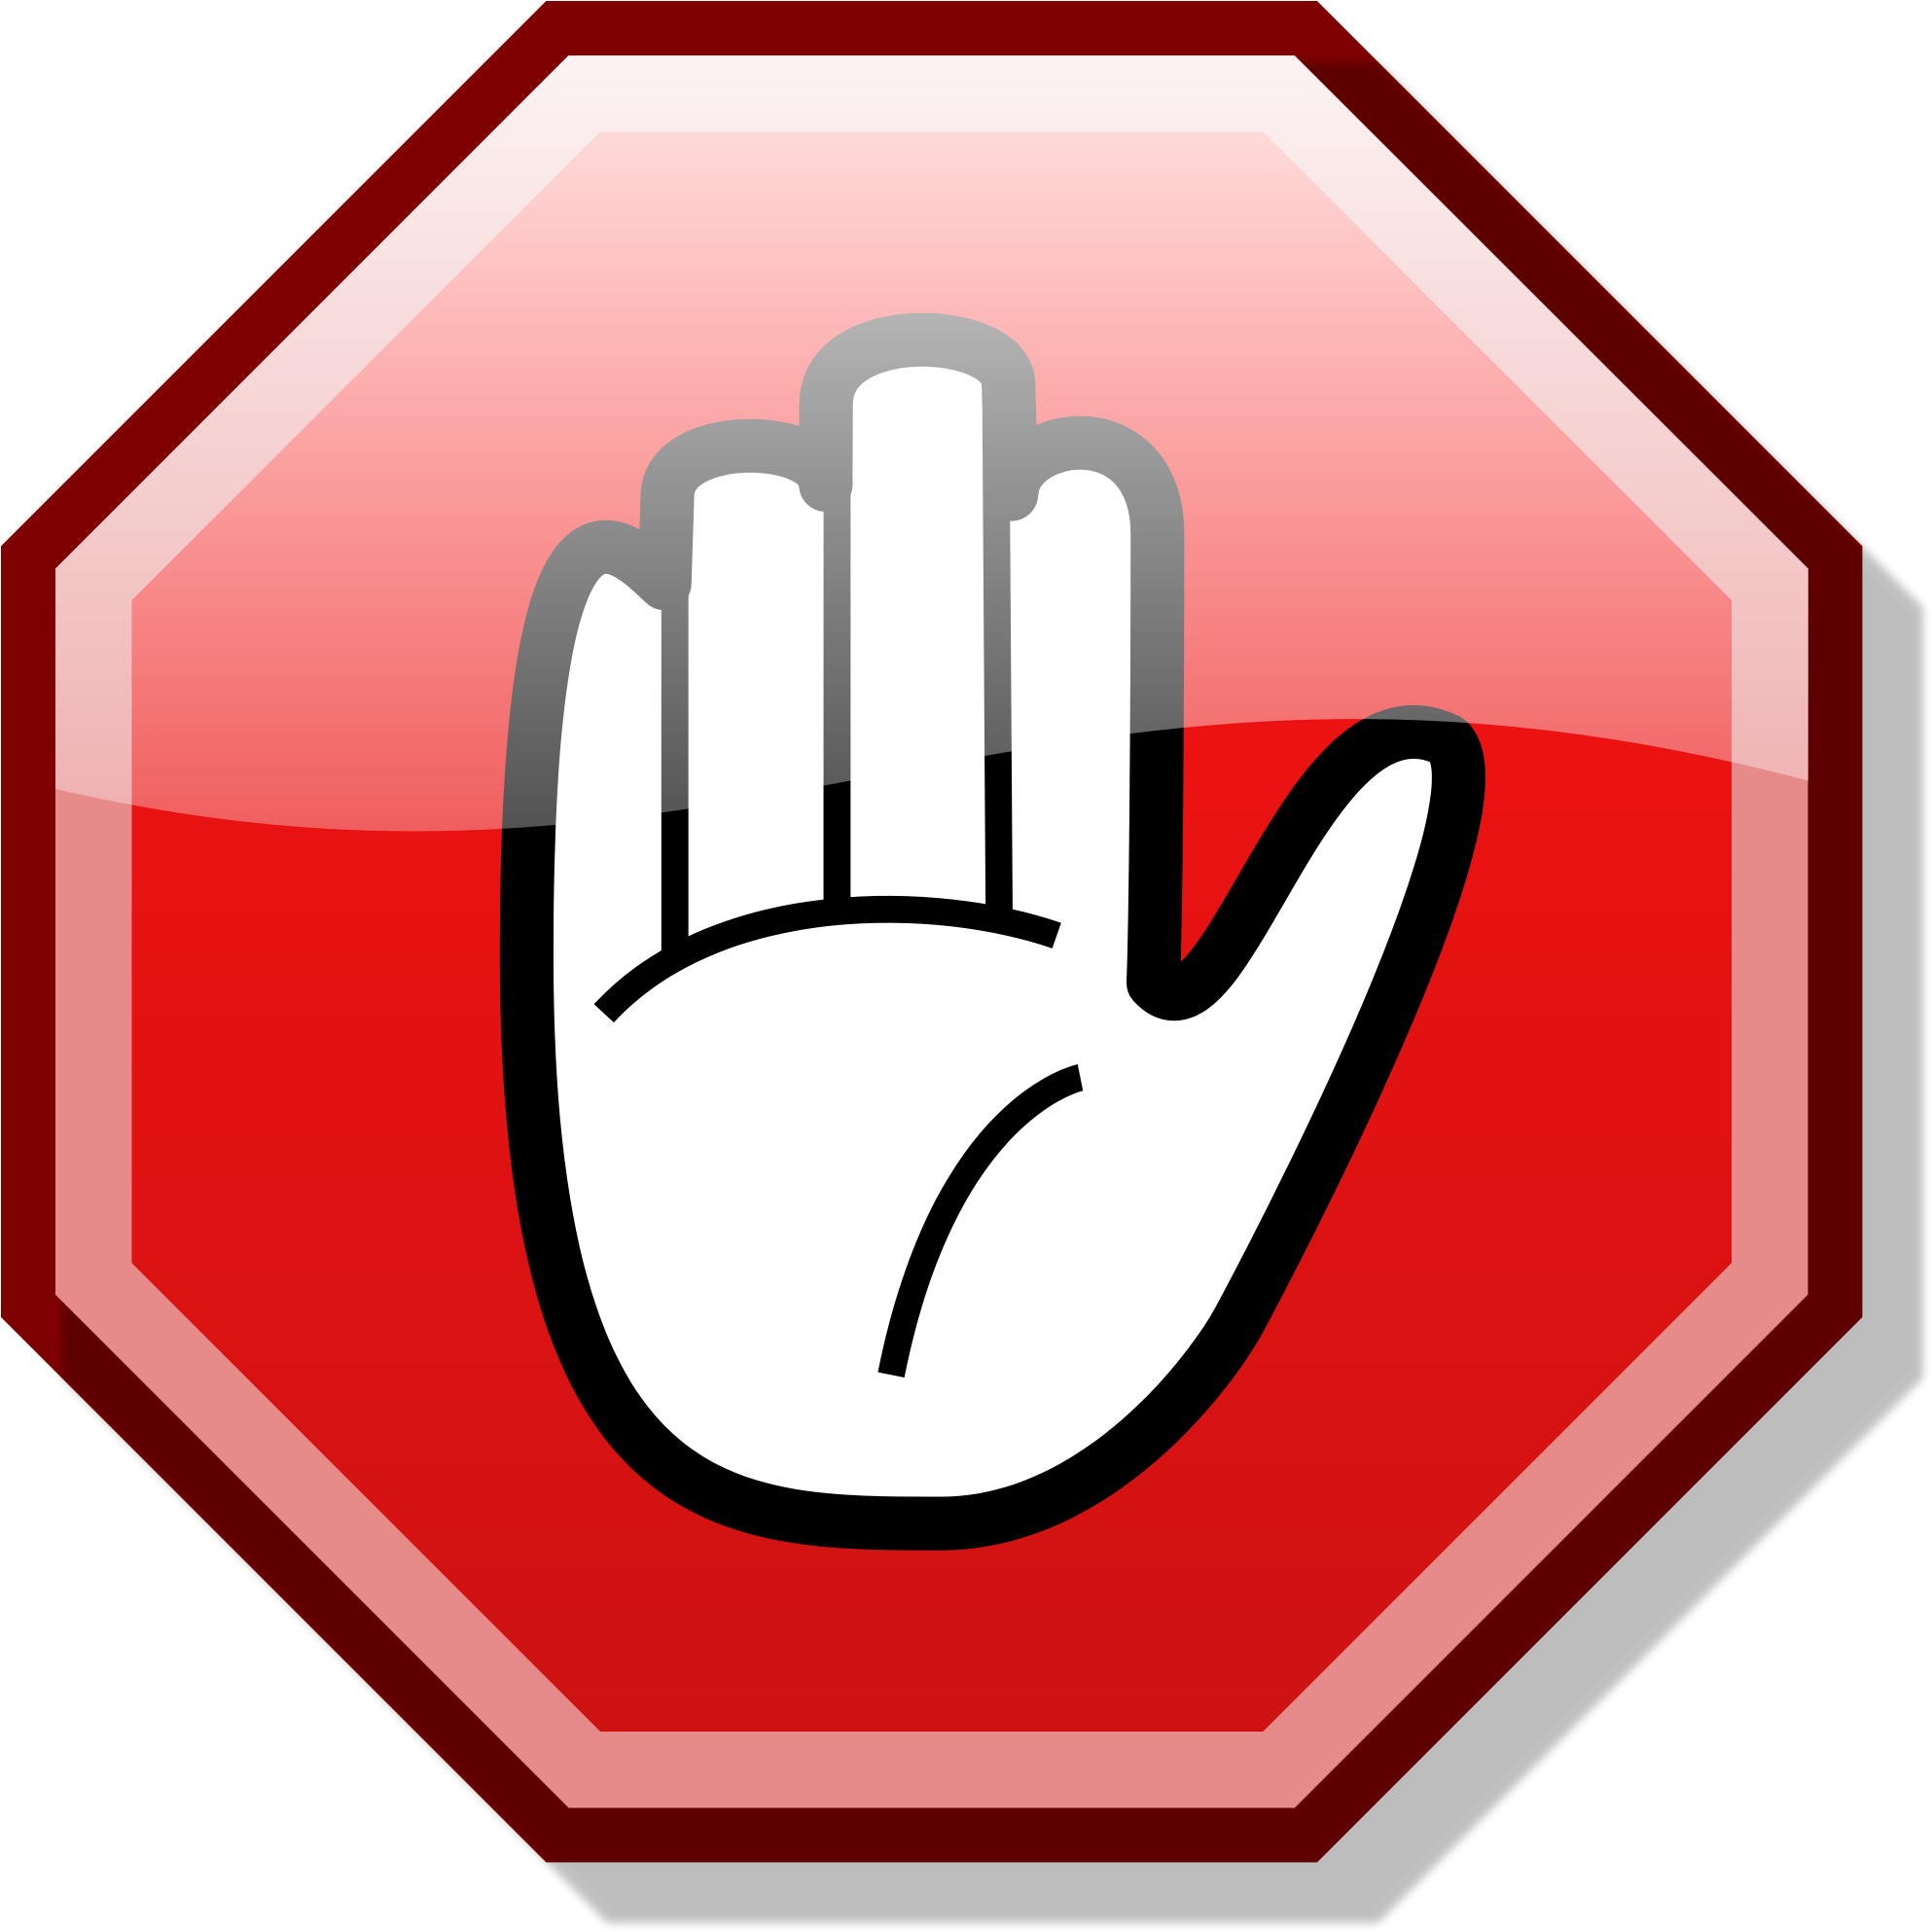 Do Not Proceed If This Is An Emergency - Stop Hand (2000x2000)